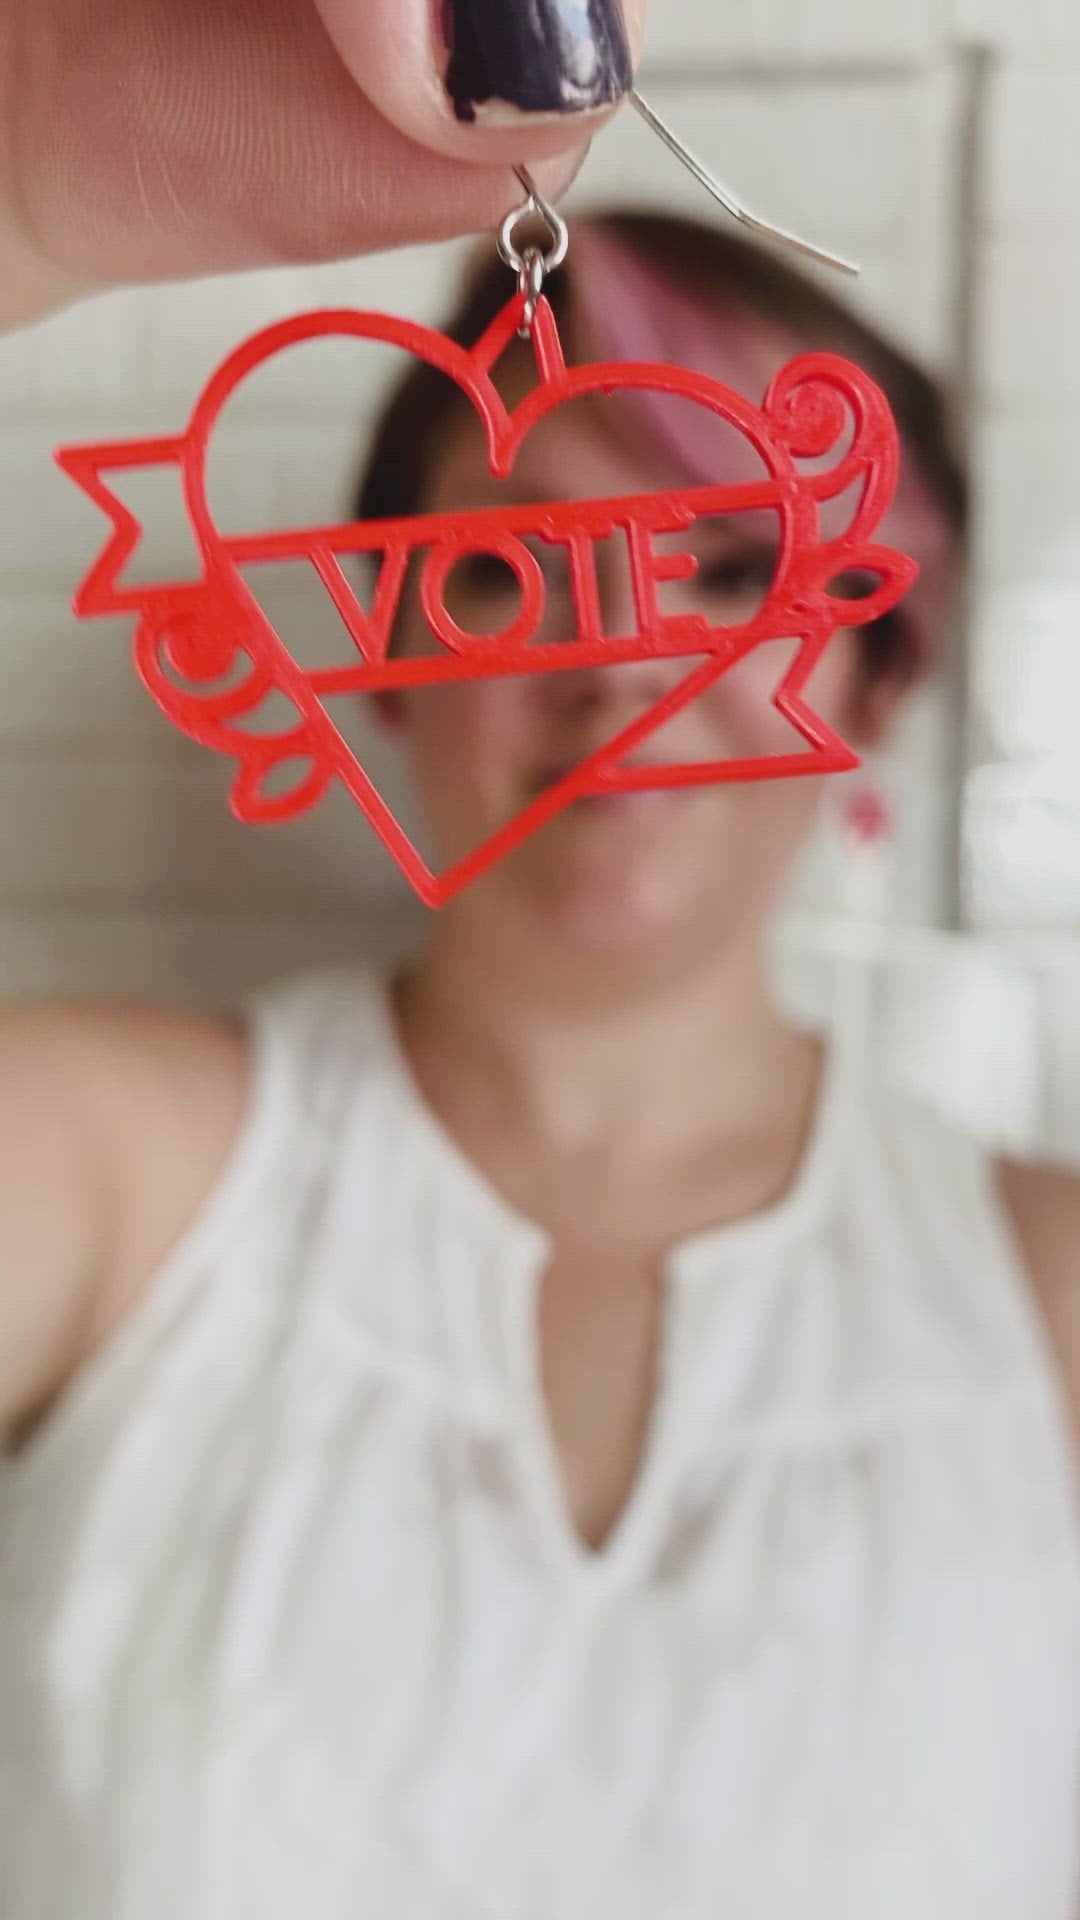 This is a video of Rebekah Thornhill, owner of R+D, showing a 3D printed earring. First she shows the earring close up. It is a bright red color and shaped as a heart with a banner twisting around it with roses on the sides. Writted on the banner is VOTE. After showing the earring, she puts it on and shows the size of the earrings when being worn. 